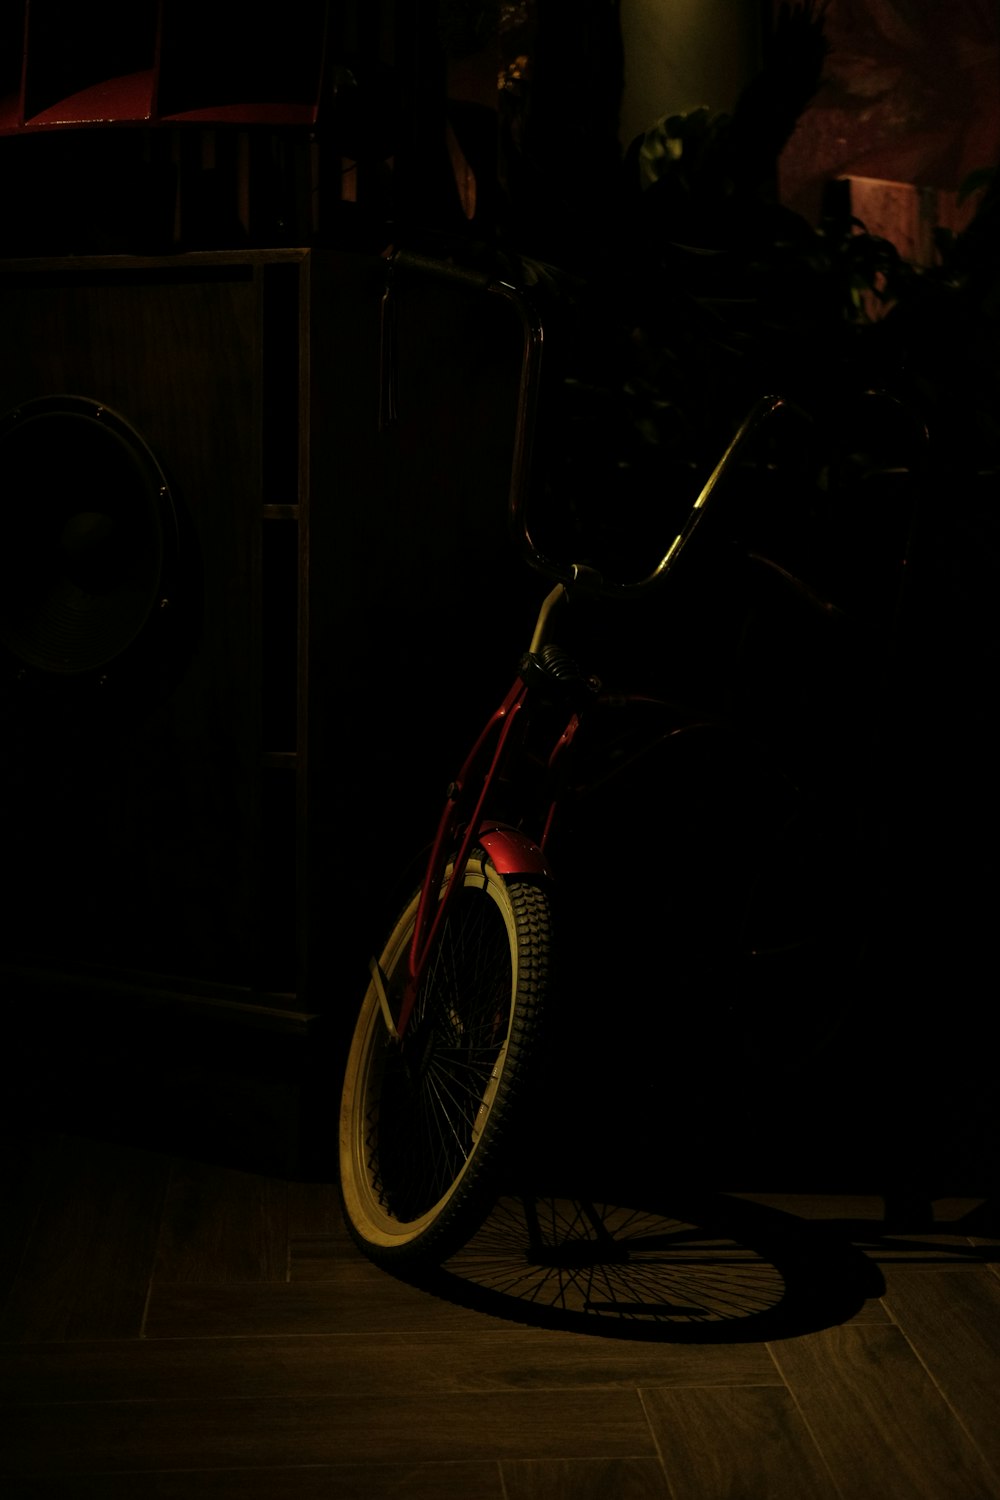 a bike is sitting on the floor in the dark